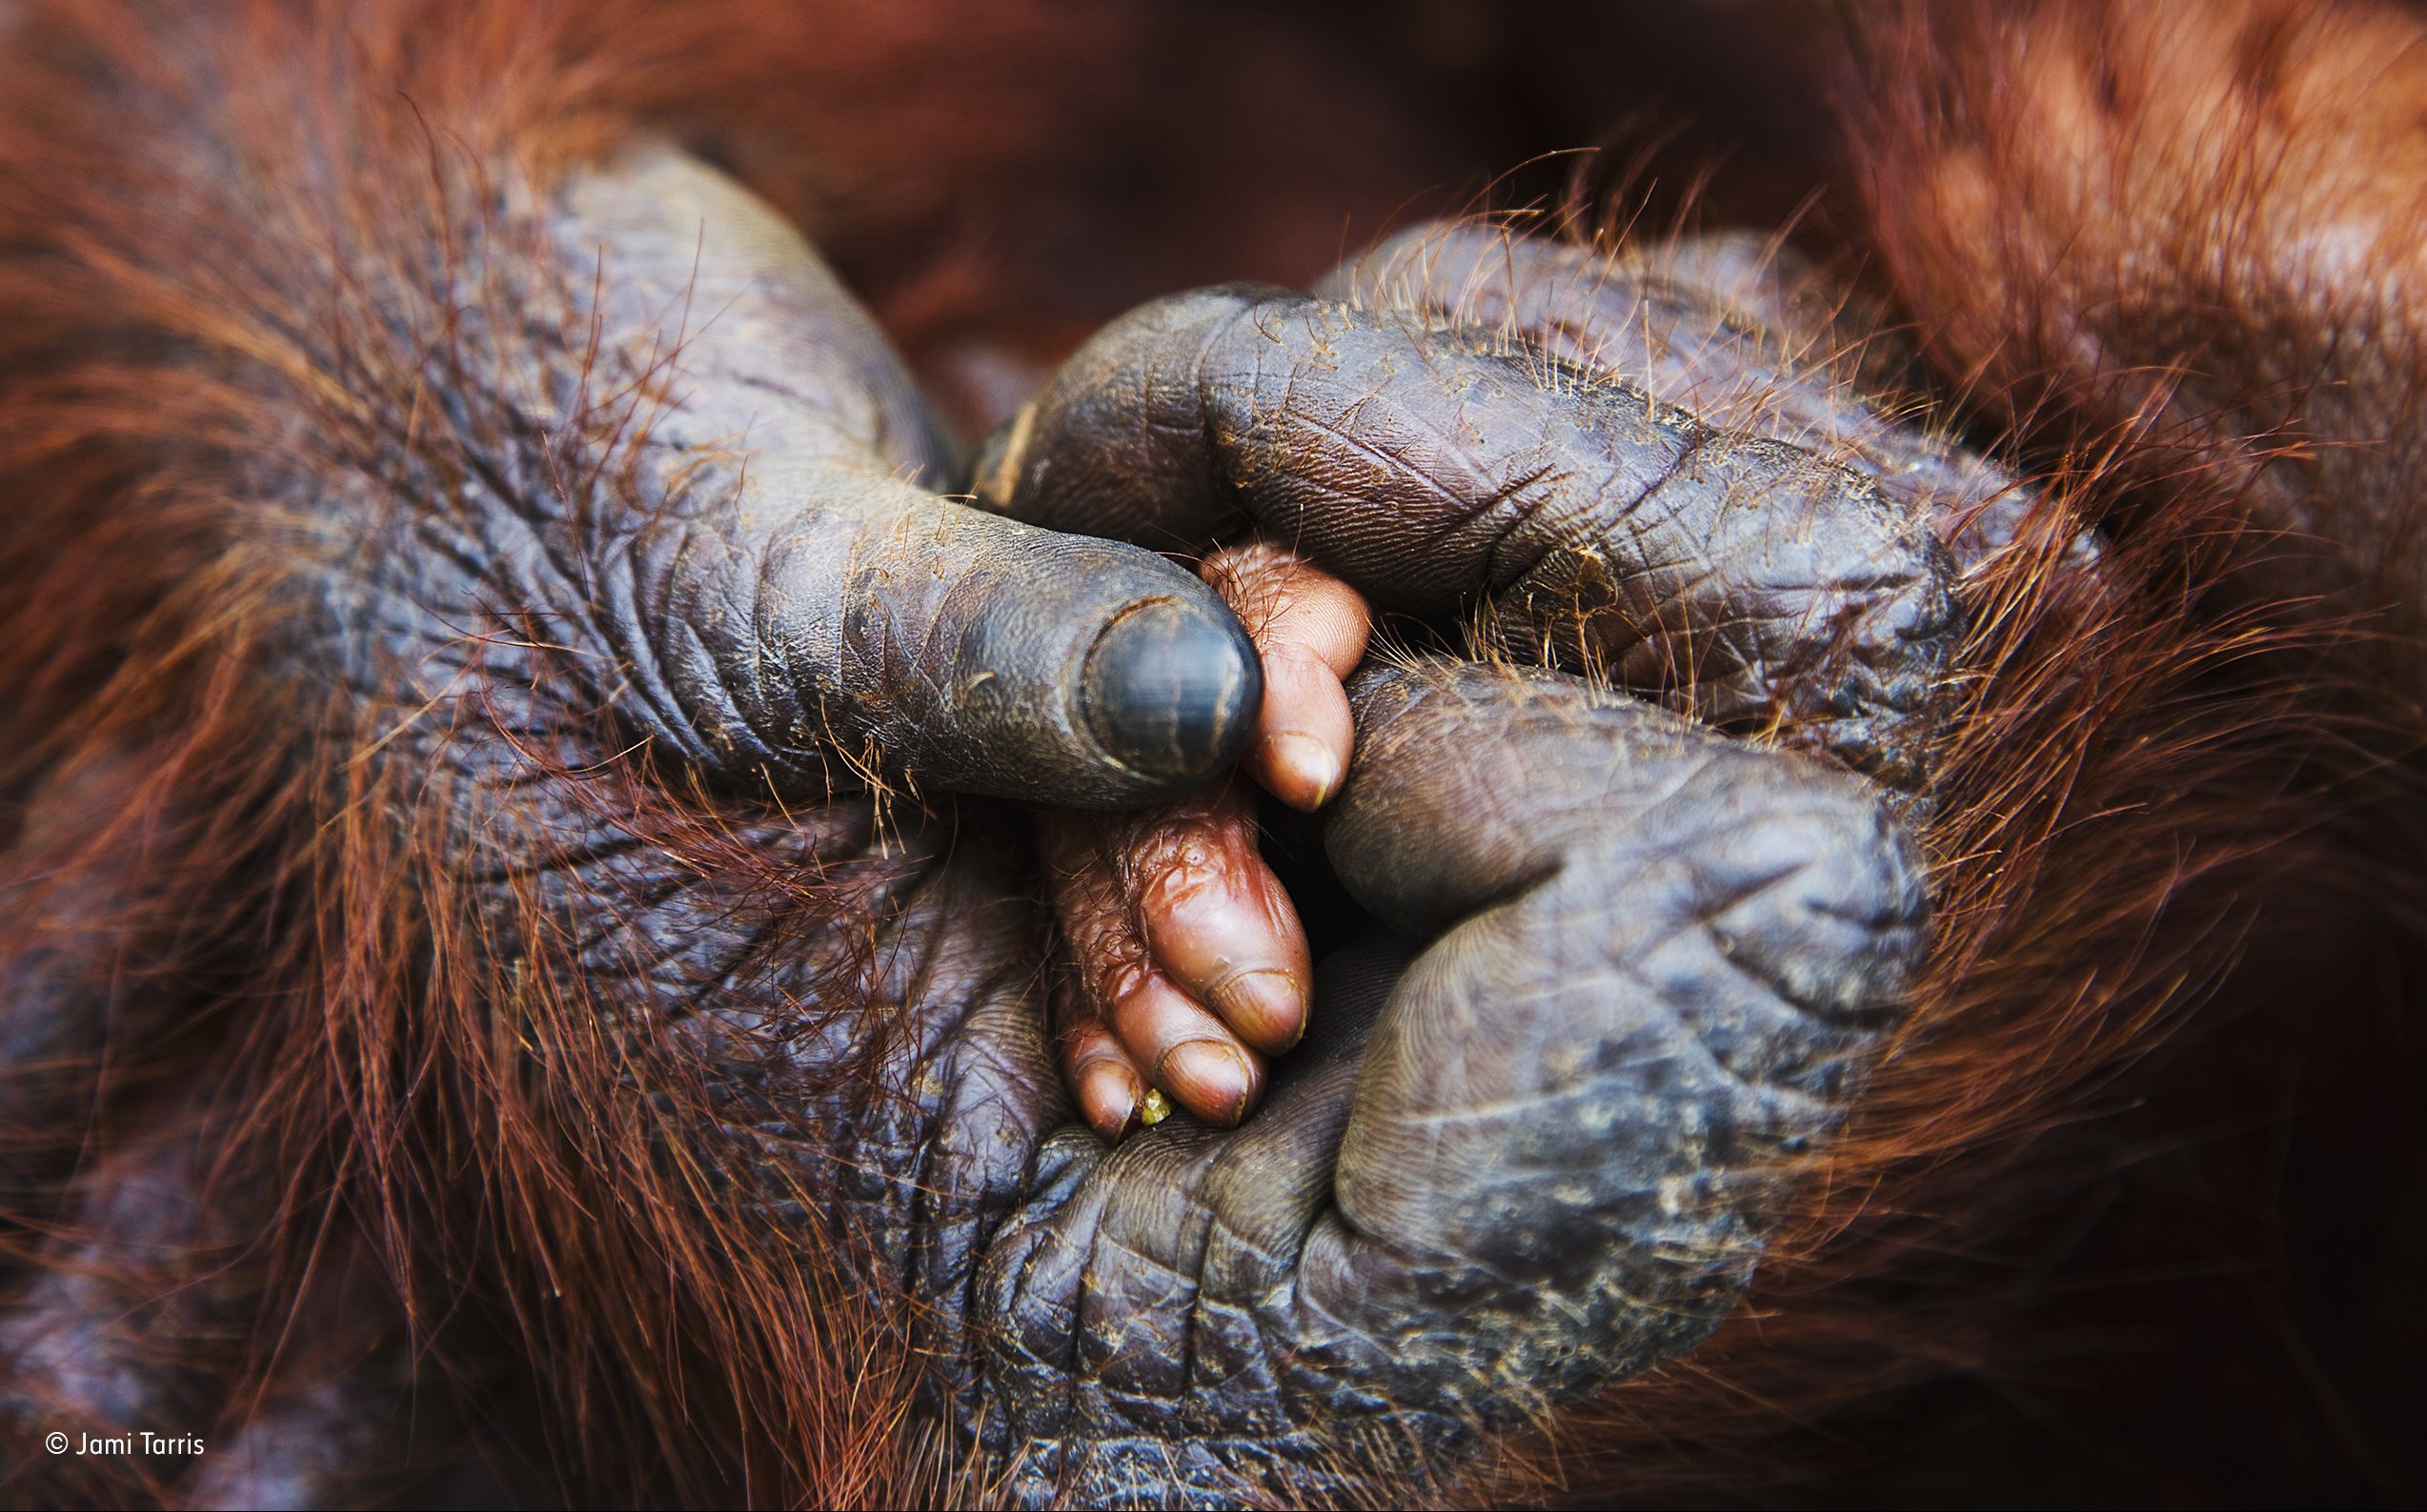 This close-up captures the touching moment an infant lays its smallhand in the big hand of its mother. Jami took this photograph whileshe was in Borneo working on a story about the effects of 
page 3of 6palm-oilagriculture on orangutan habitat. Loss of primary rainforest is aserious threat to this already critically endangered species. (Jami Tarris)